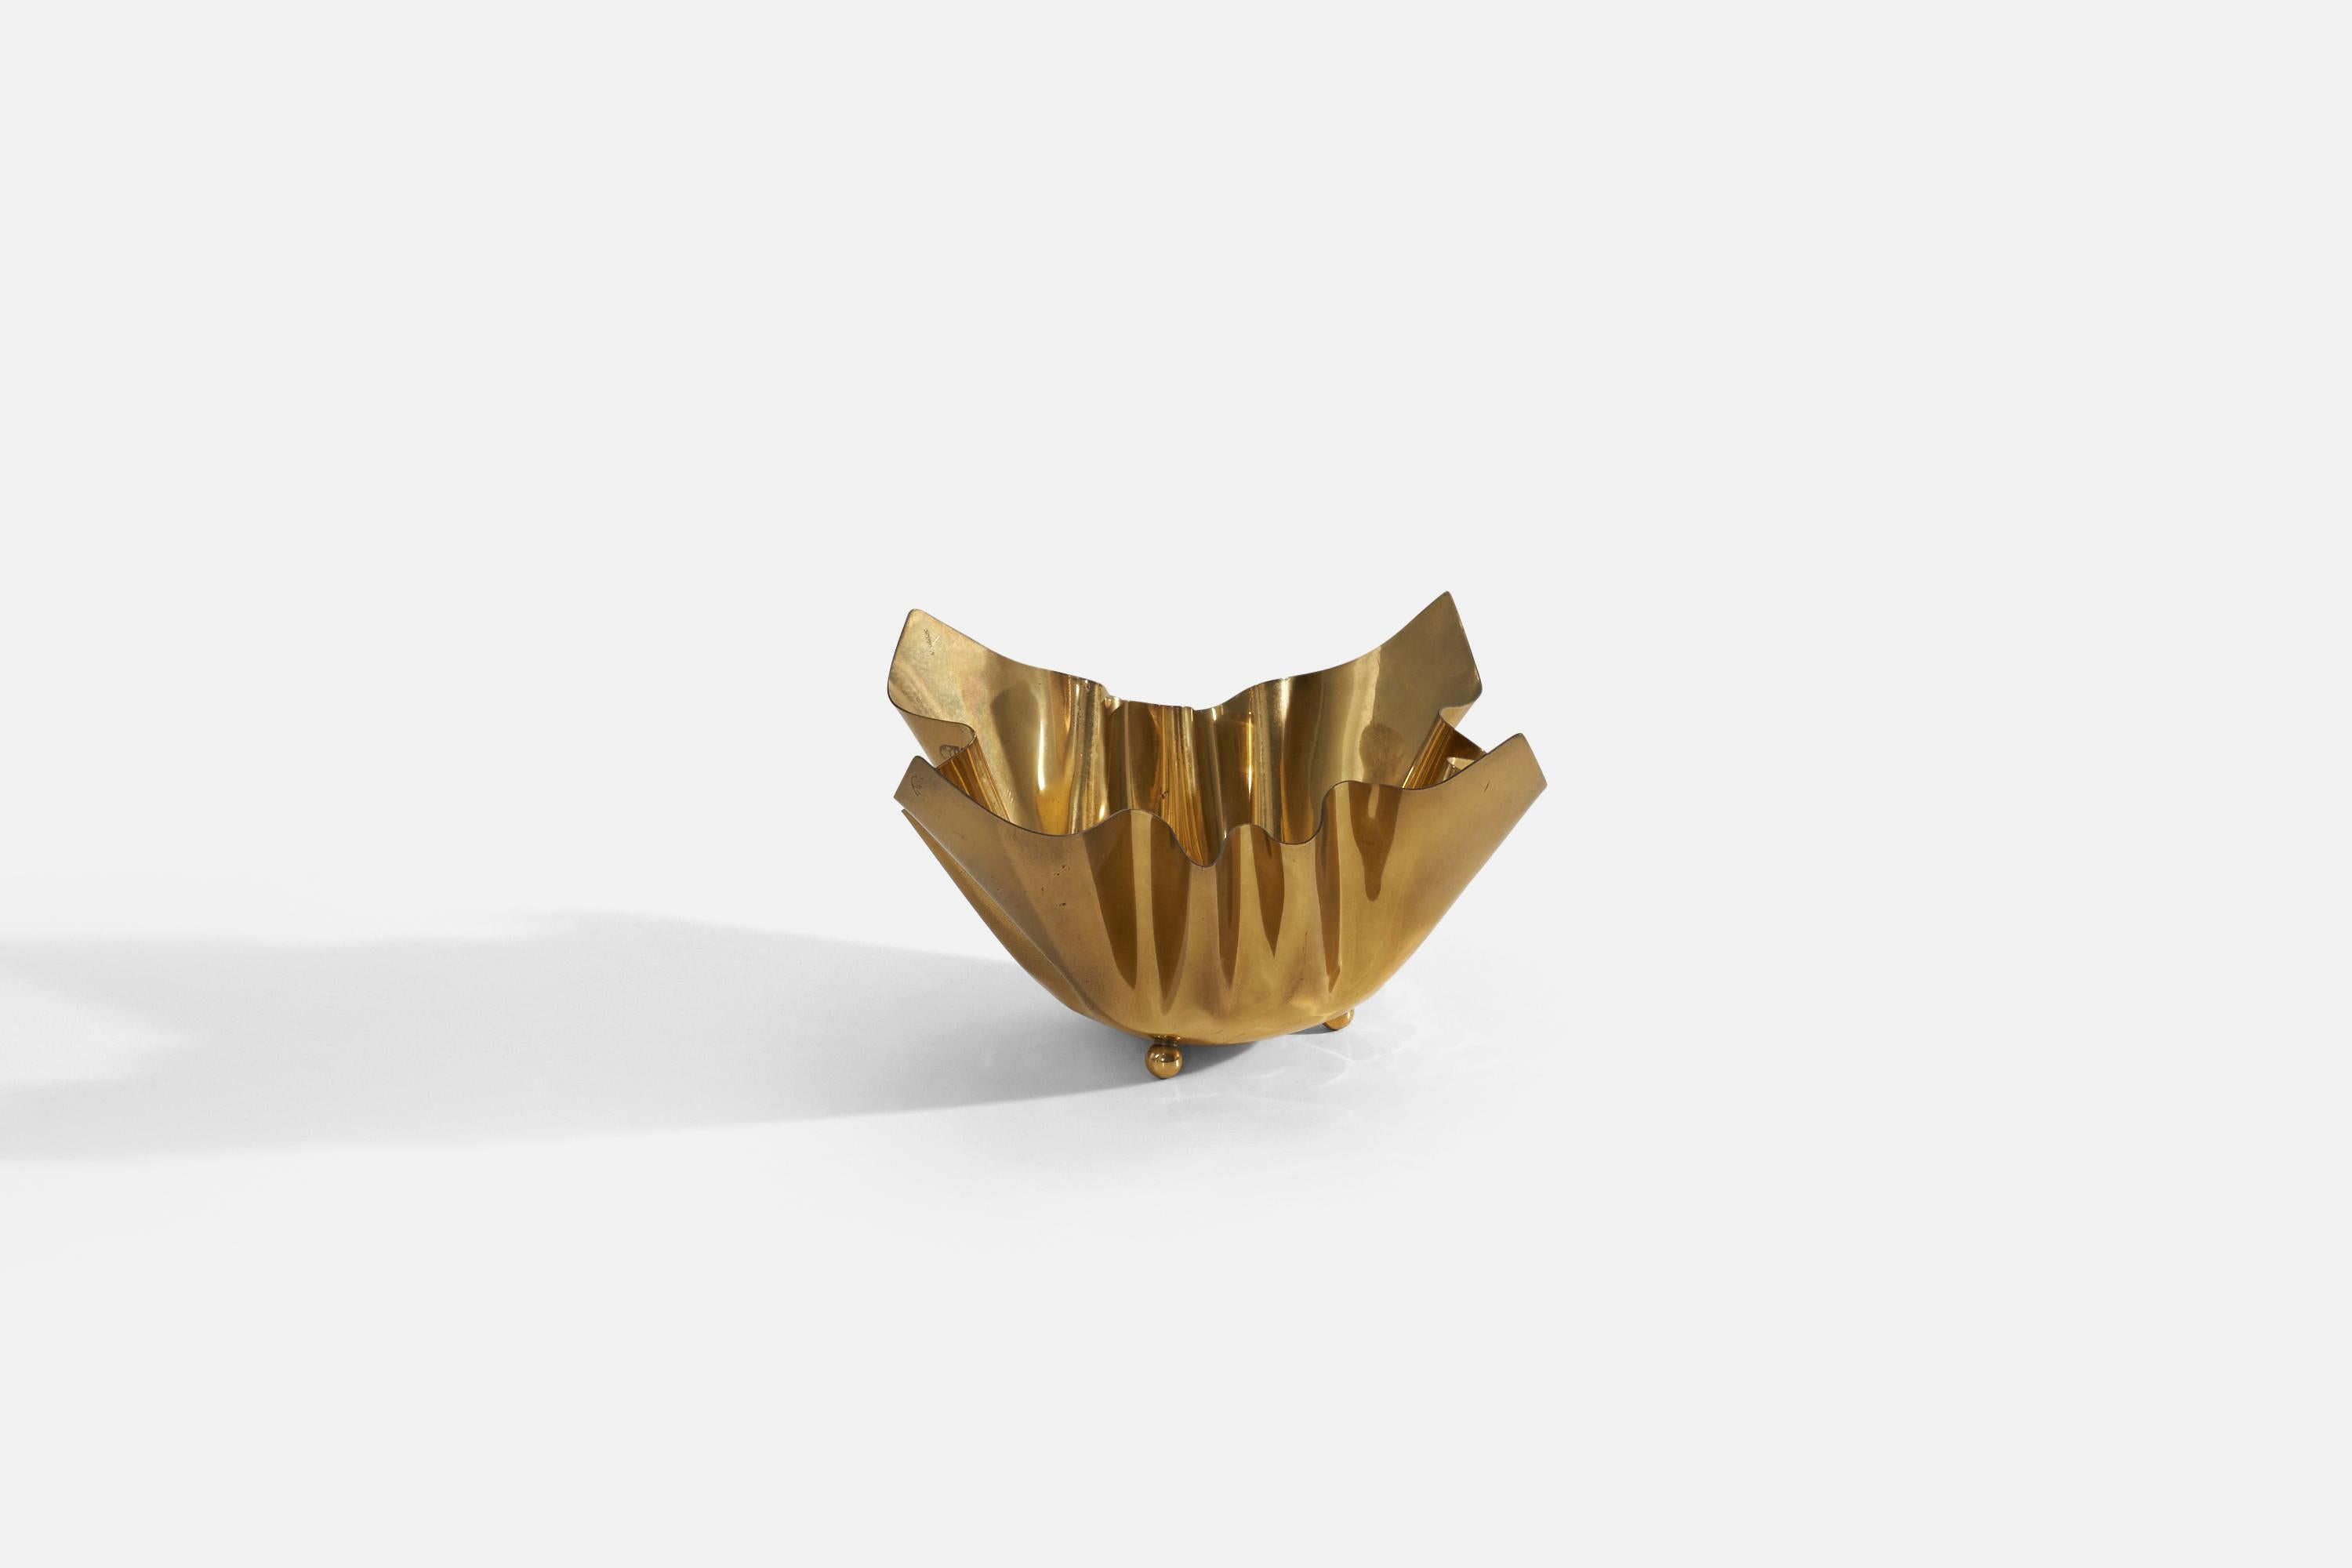 A brass free-form bowl designed and produced in Italy, c. 1970s.